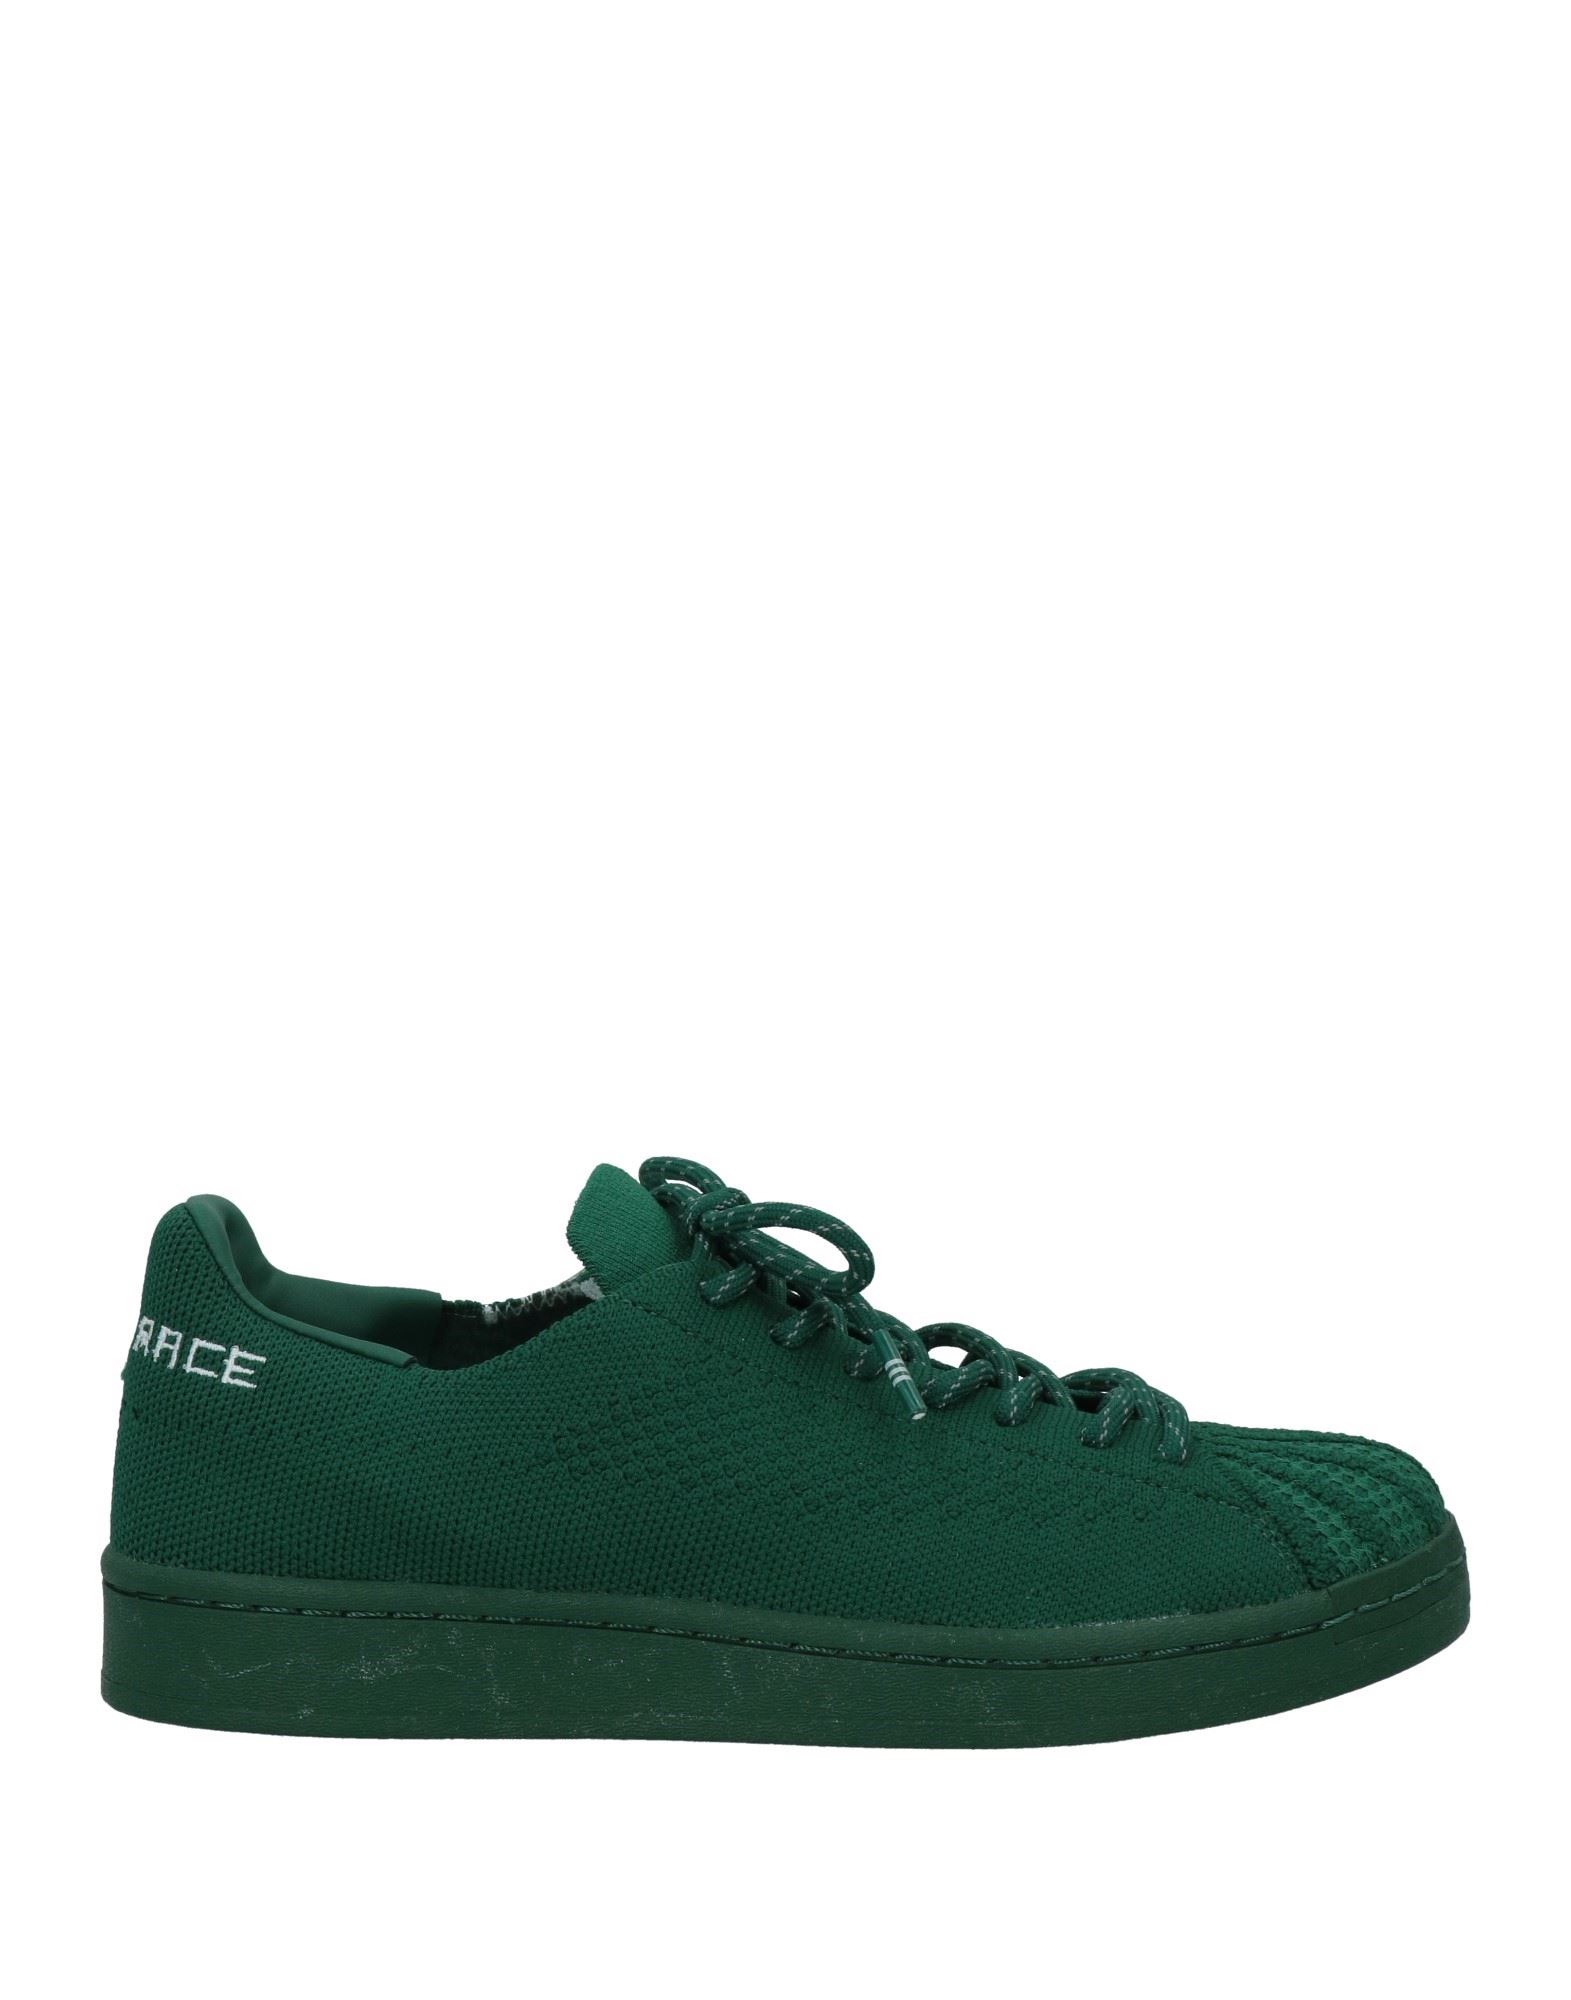 Adidas Originals By Pharrell Williams Sneakers In Green